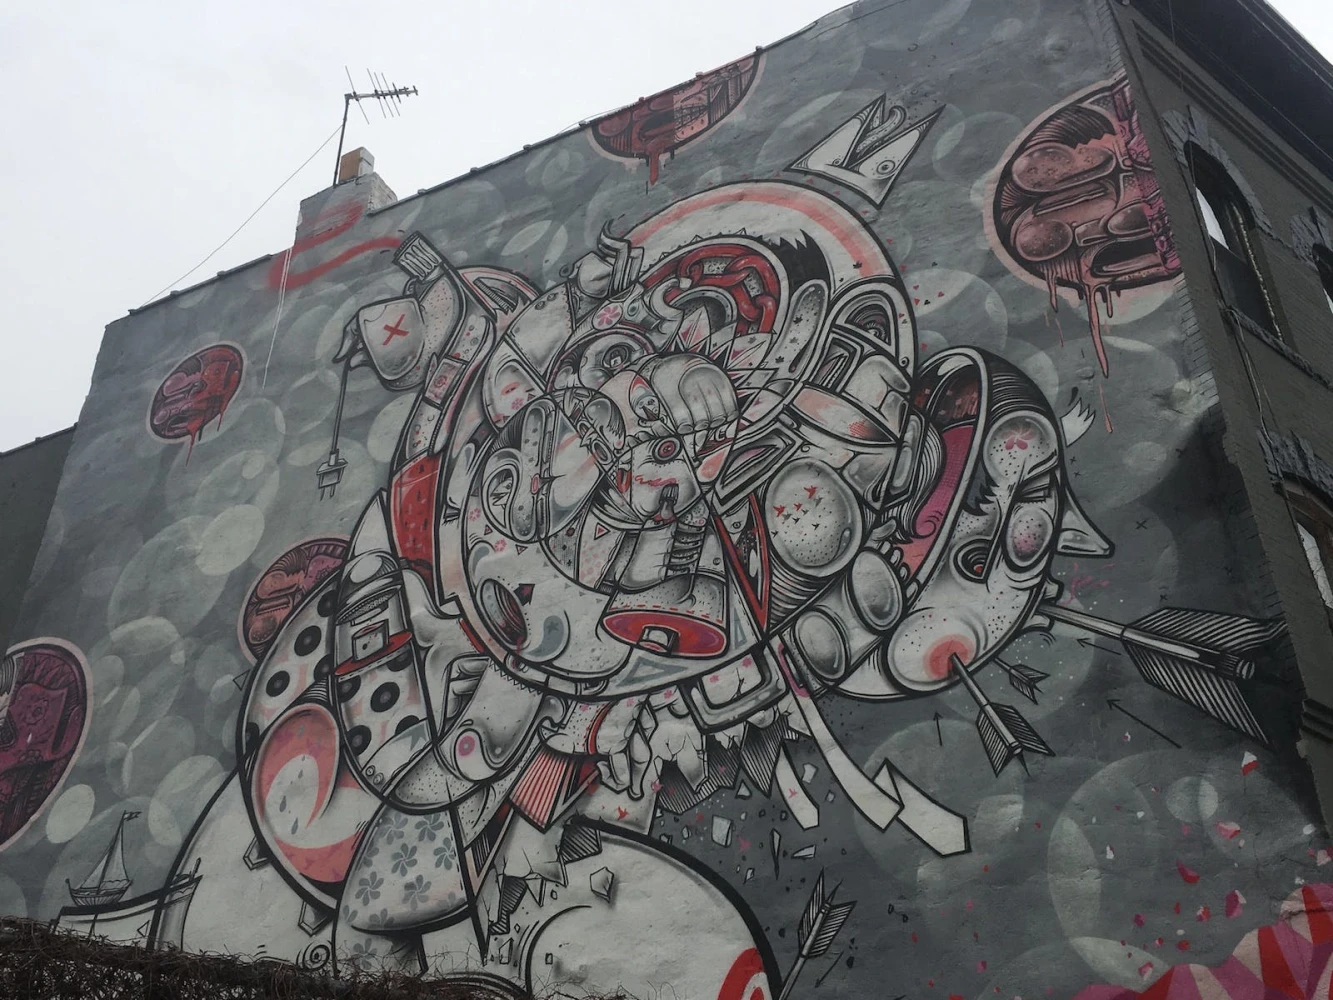 Street Art Pilgrimage in Bushwick: What to expect - 6